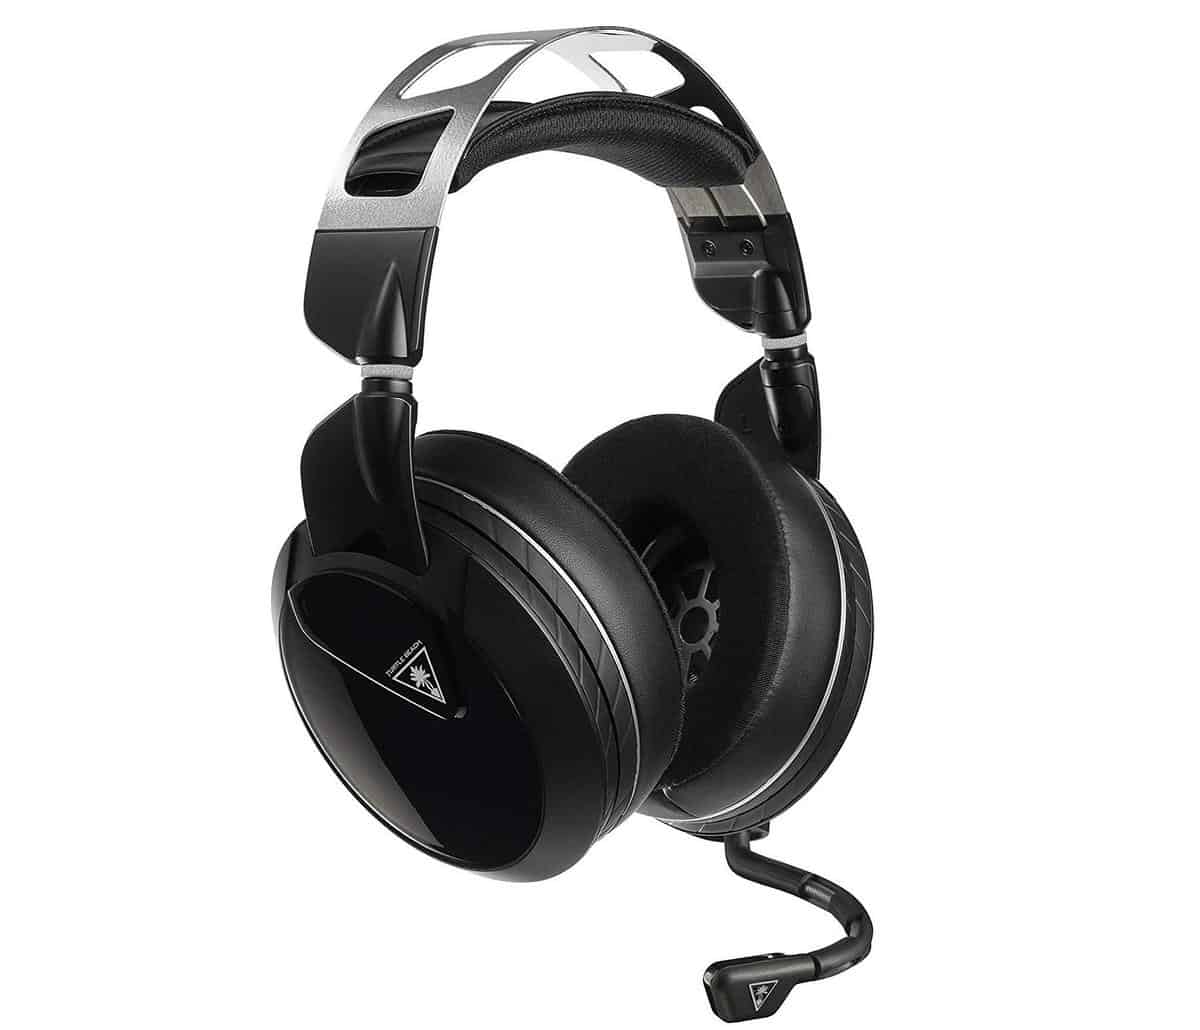 Best Gaming Headset for eSports